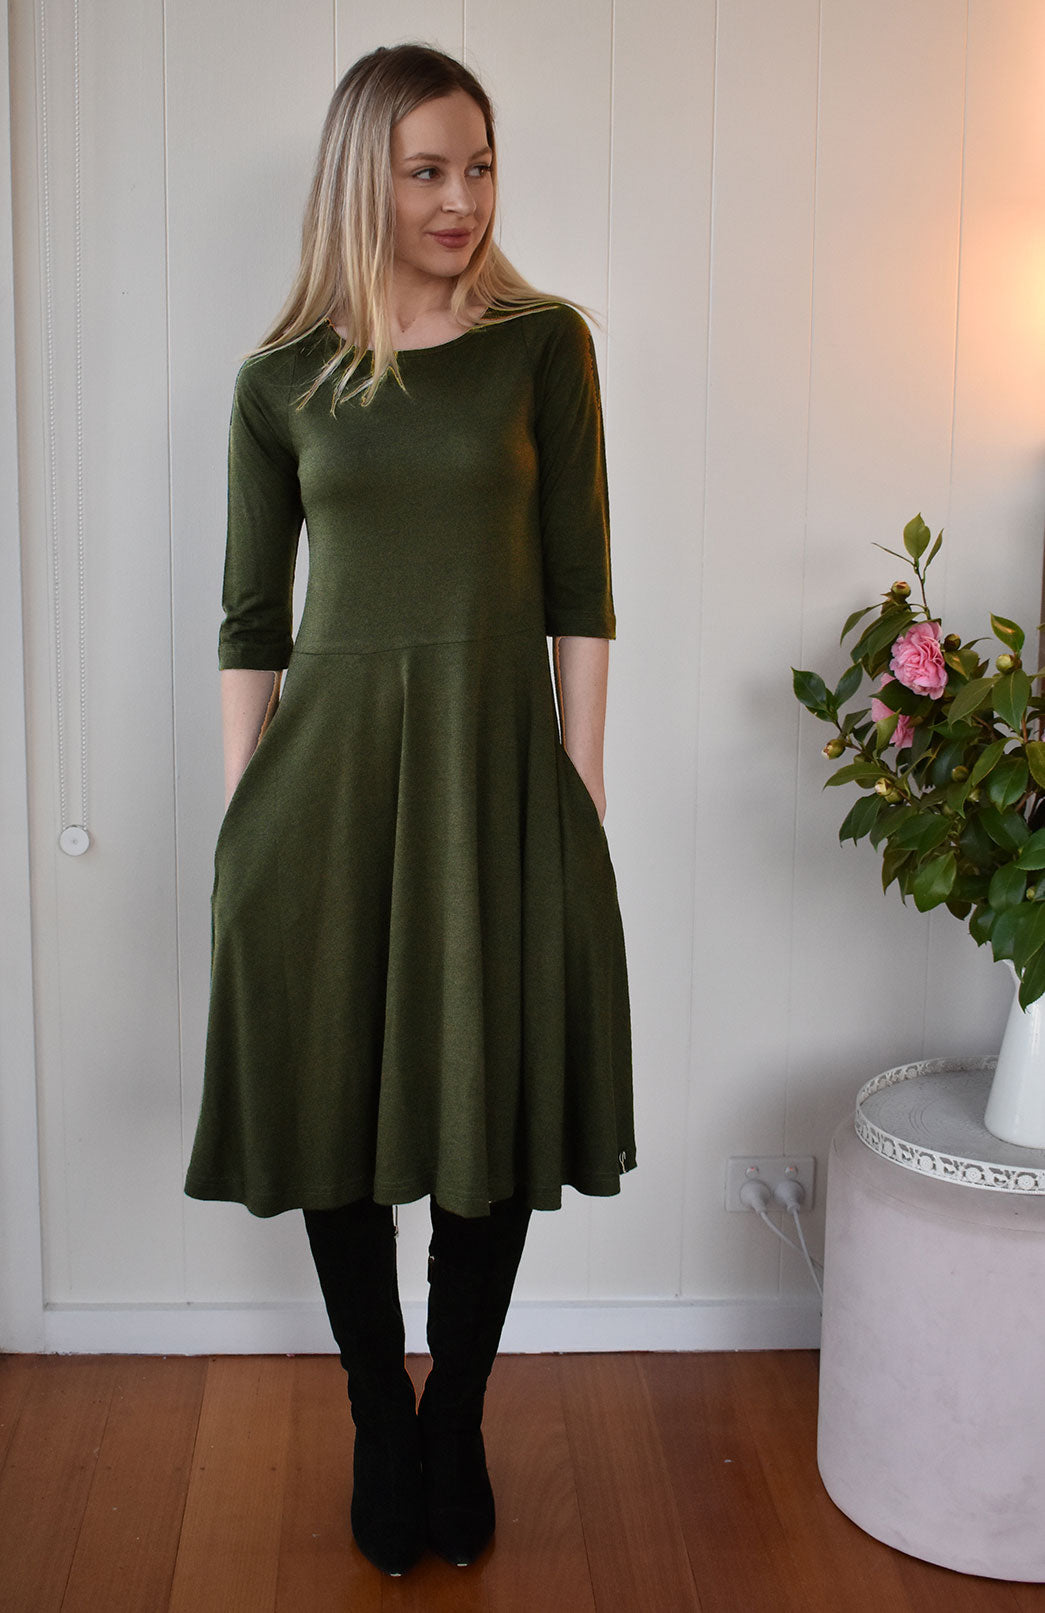 Kale Green Women&#39;s Merino Wool Fit and Flare Dress with 3/4 Sleeves
